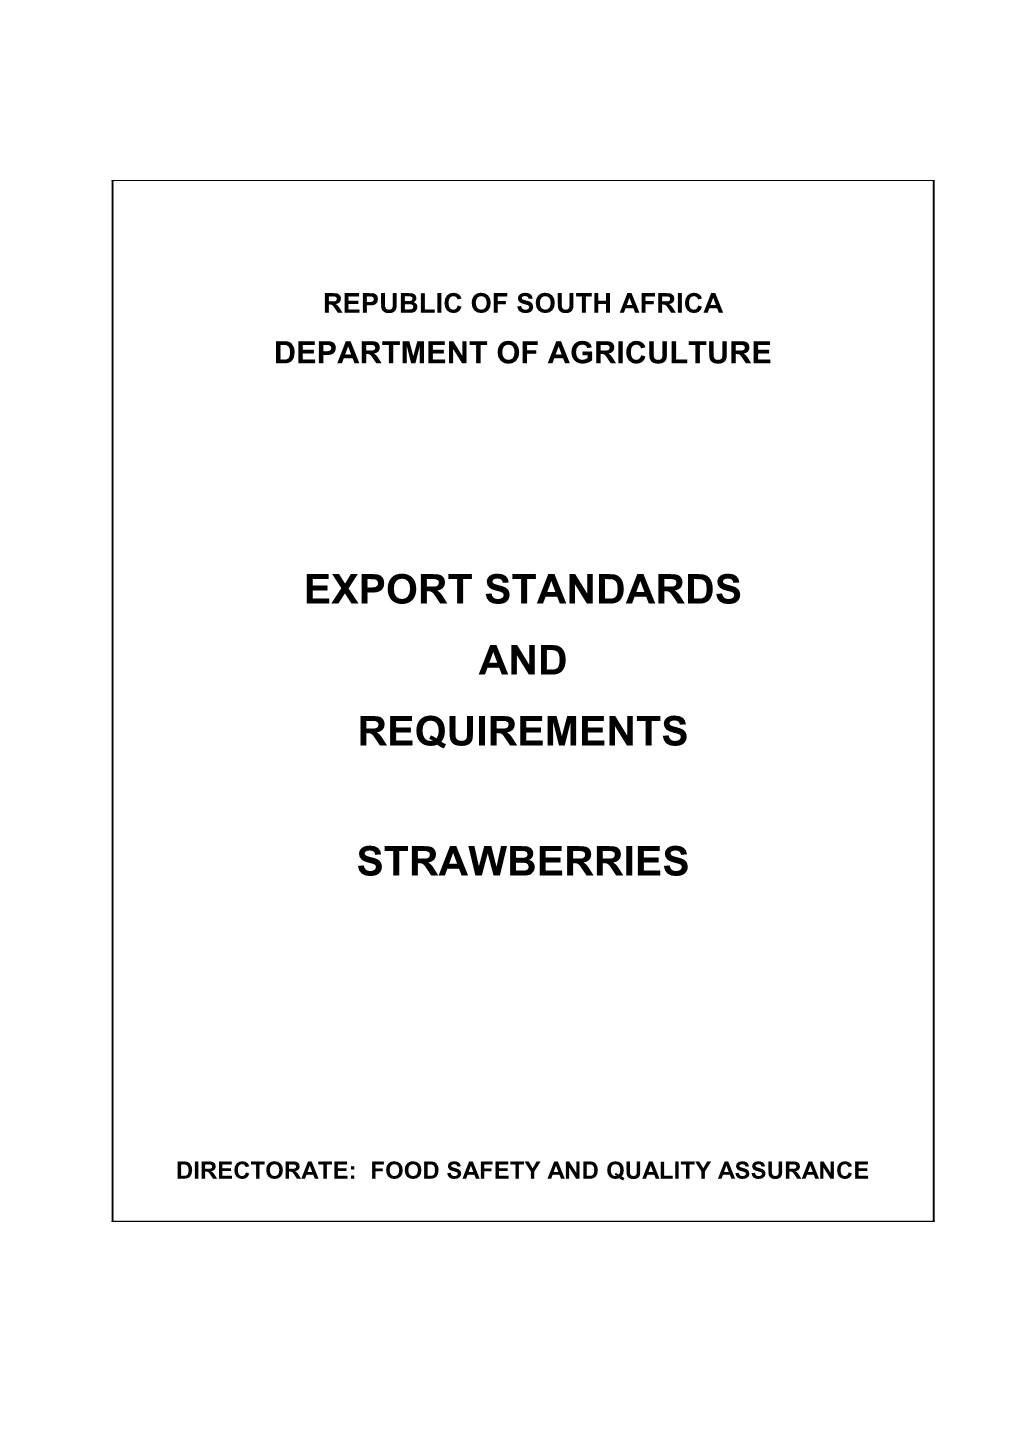 AGRICULTURAL PRODUCT STANDARDS ACT, 1990 (ACT No. 119 of 1990)